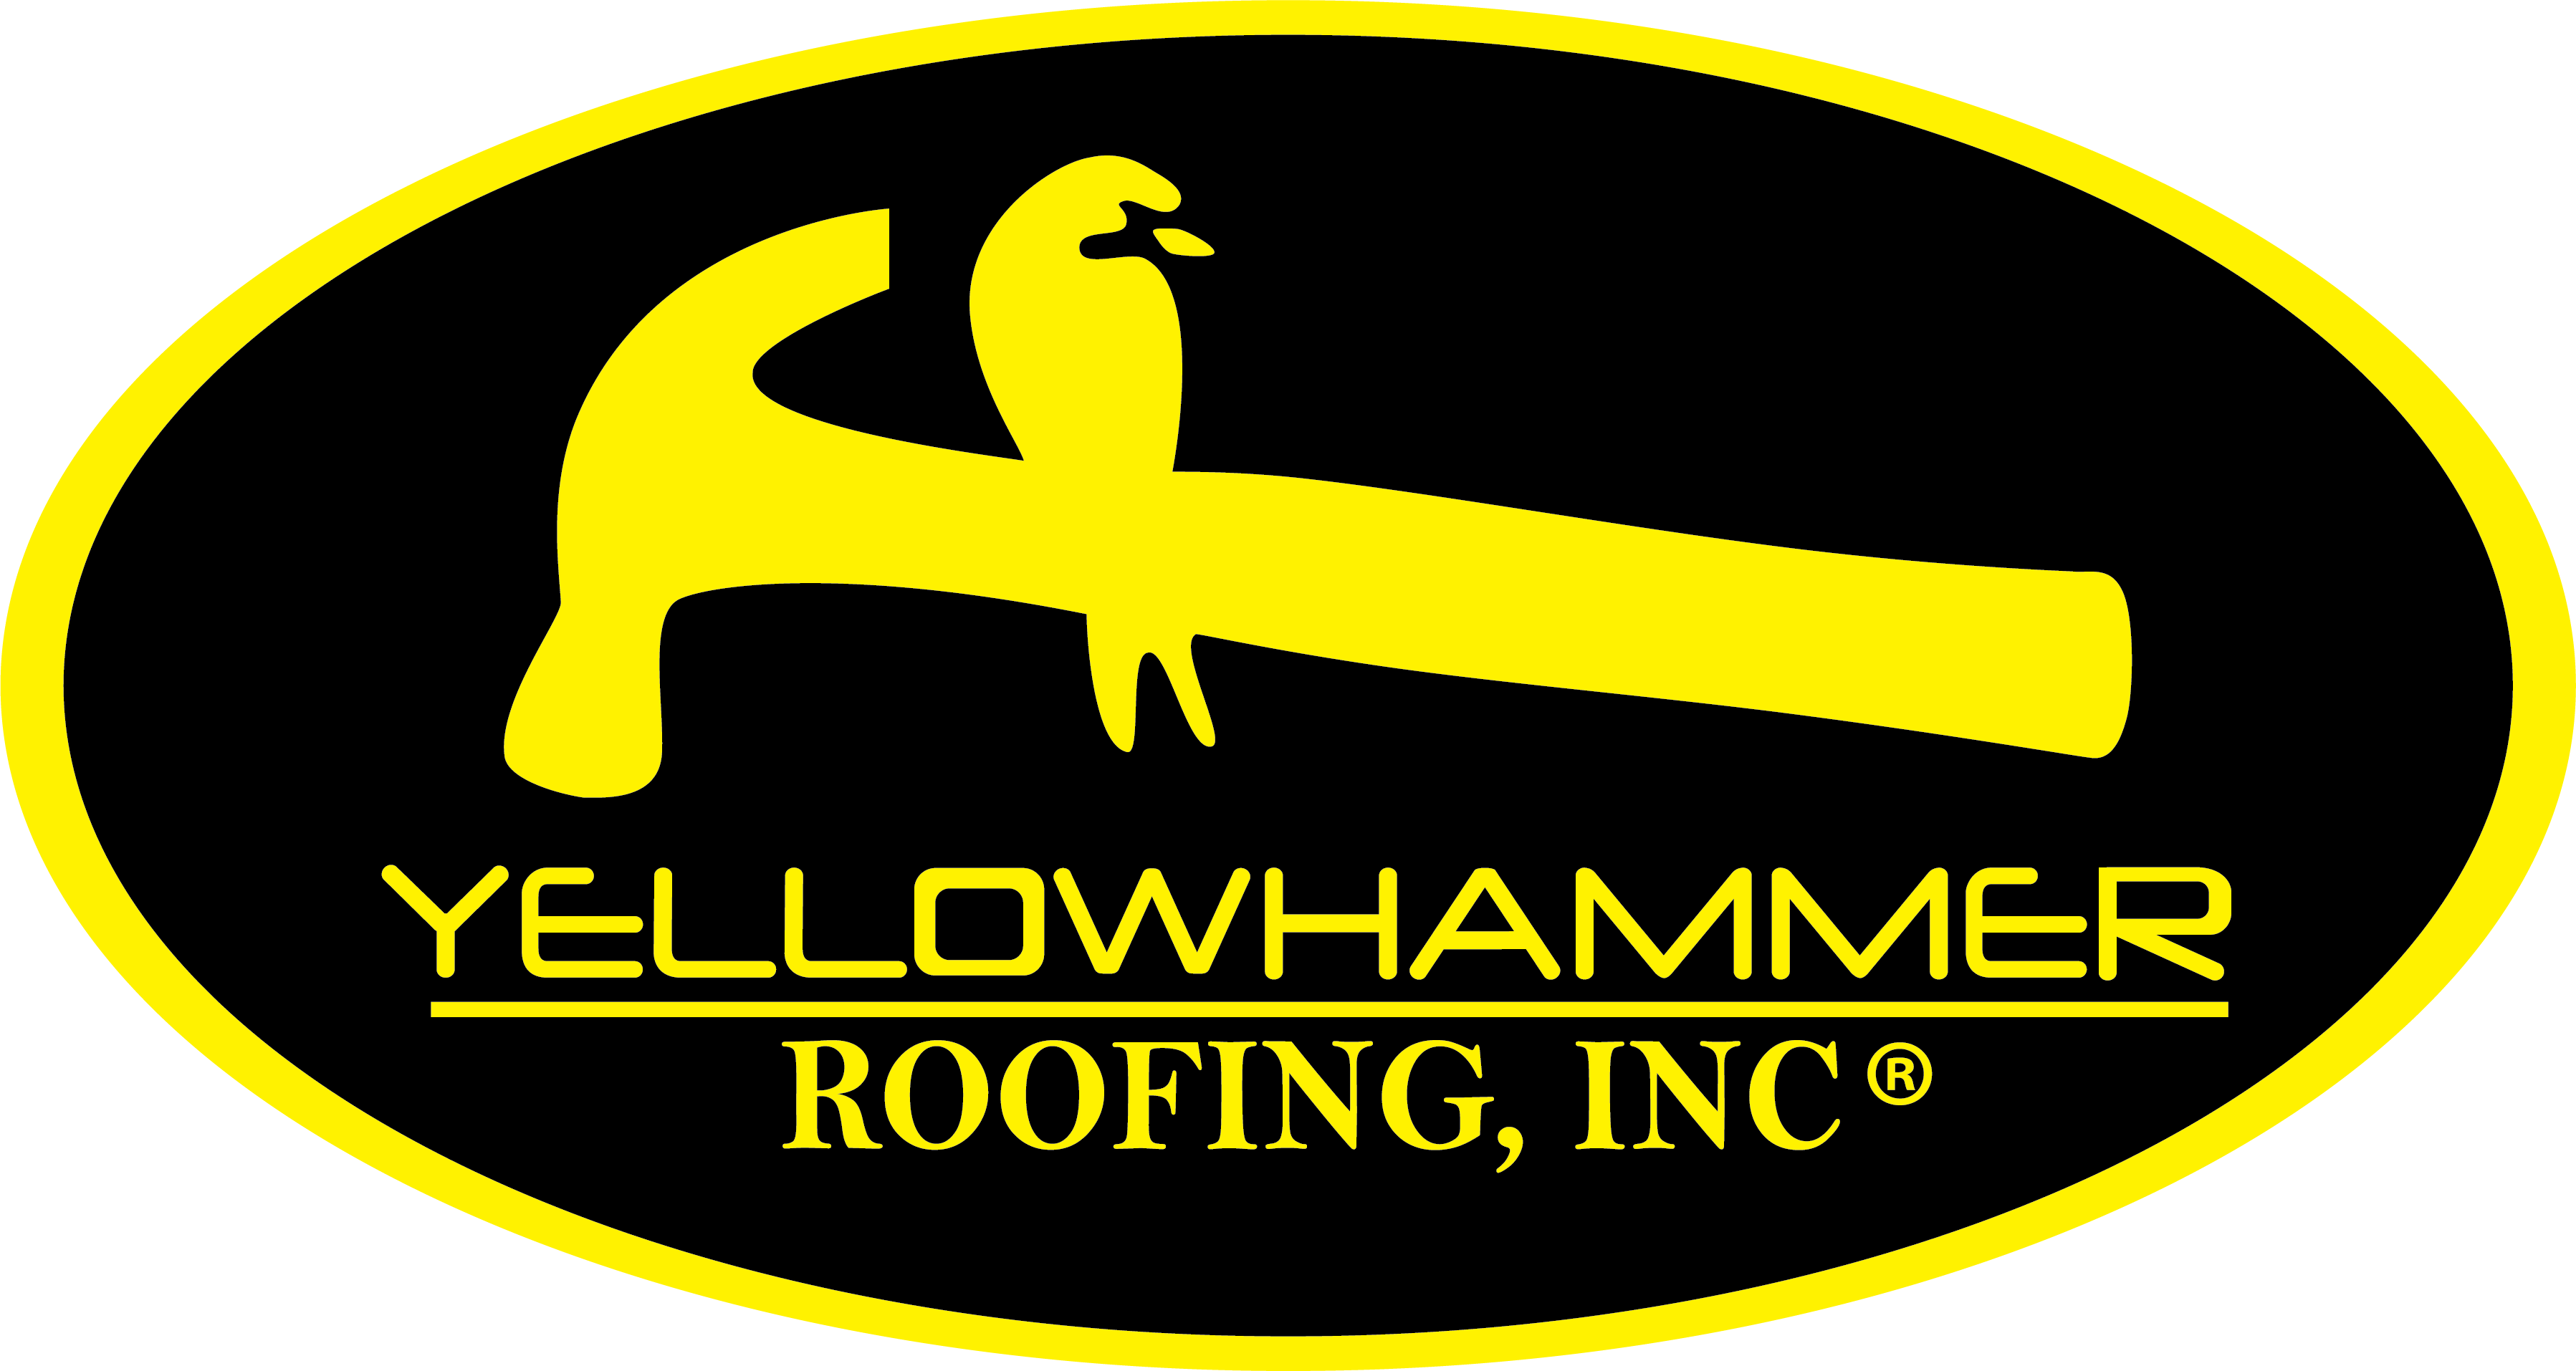 Yellowhammer Roofing Inc roofing company in Alabama